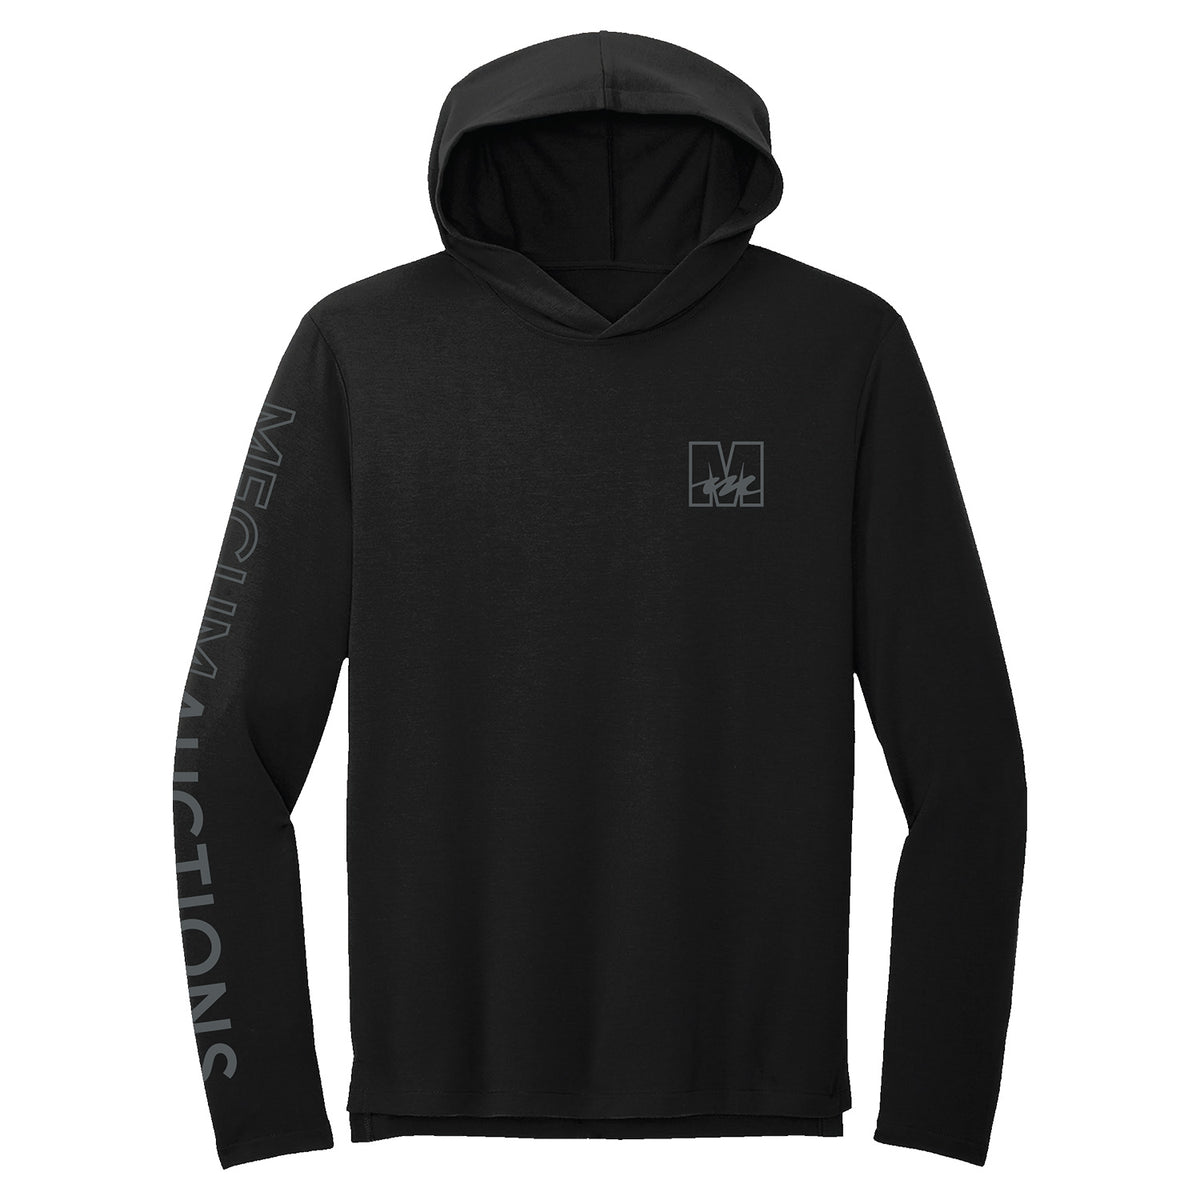 Mecum Auctions Black Logo Pullover Hoodie - Front View